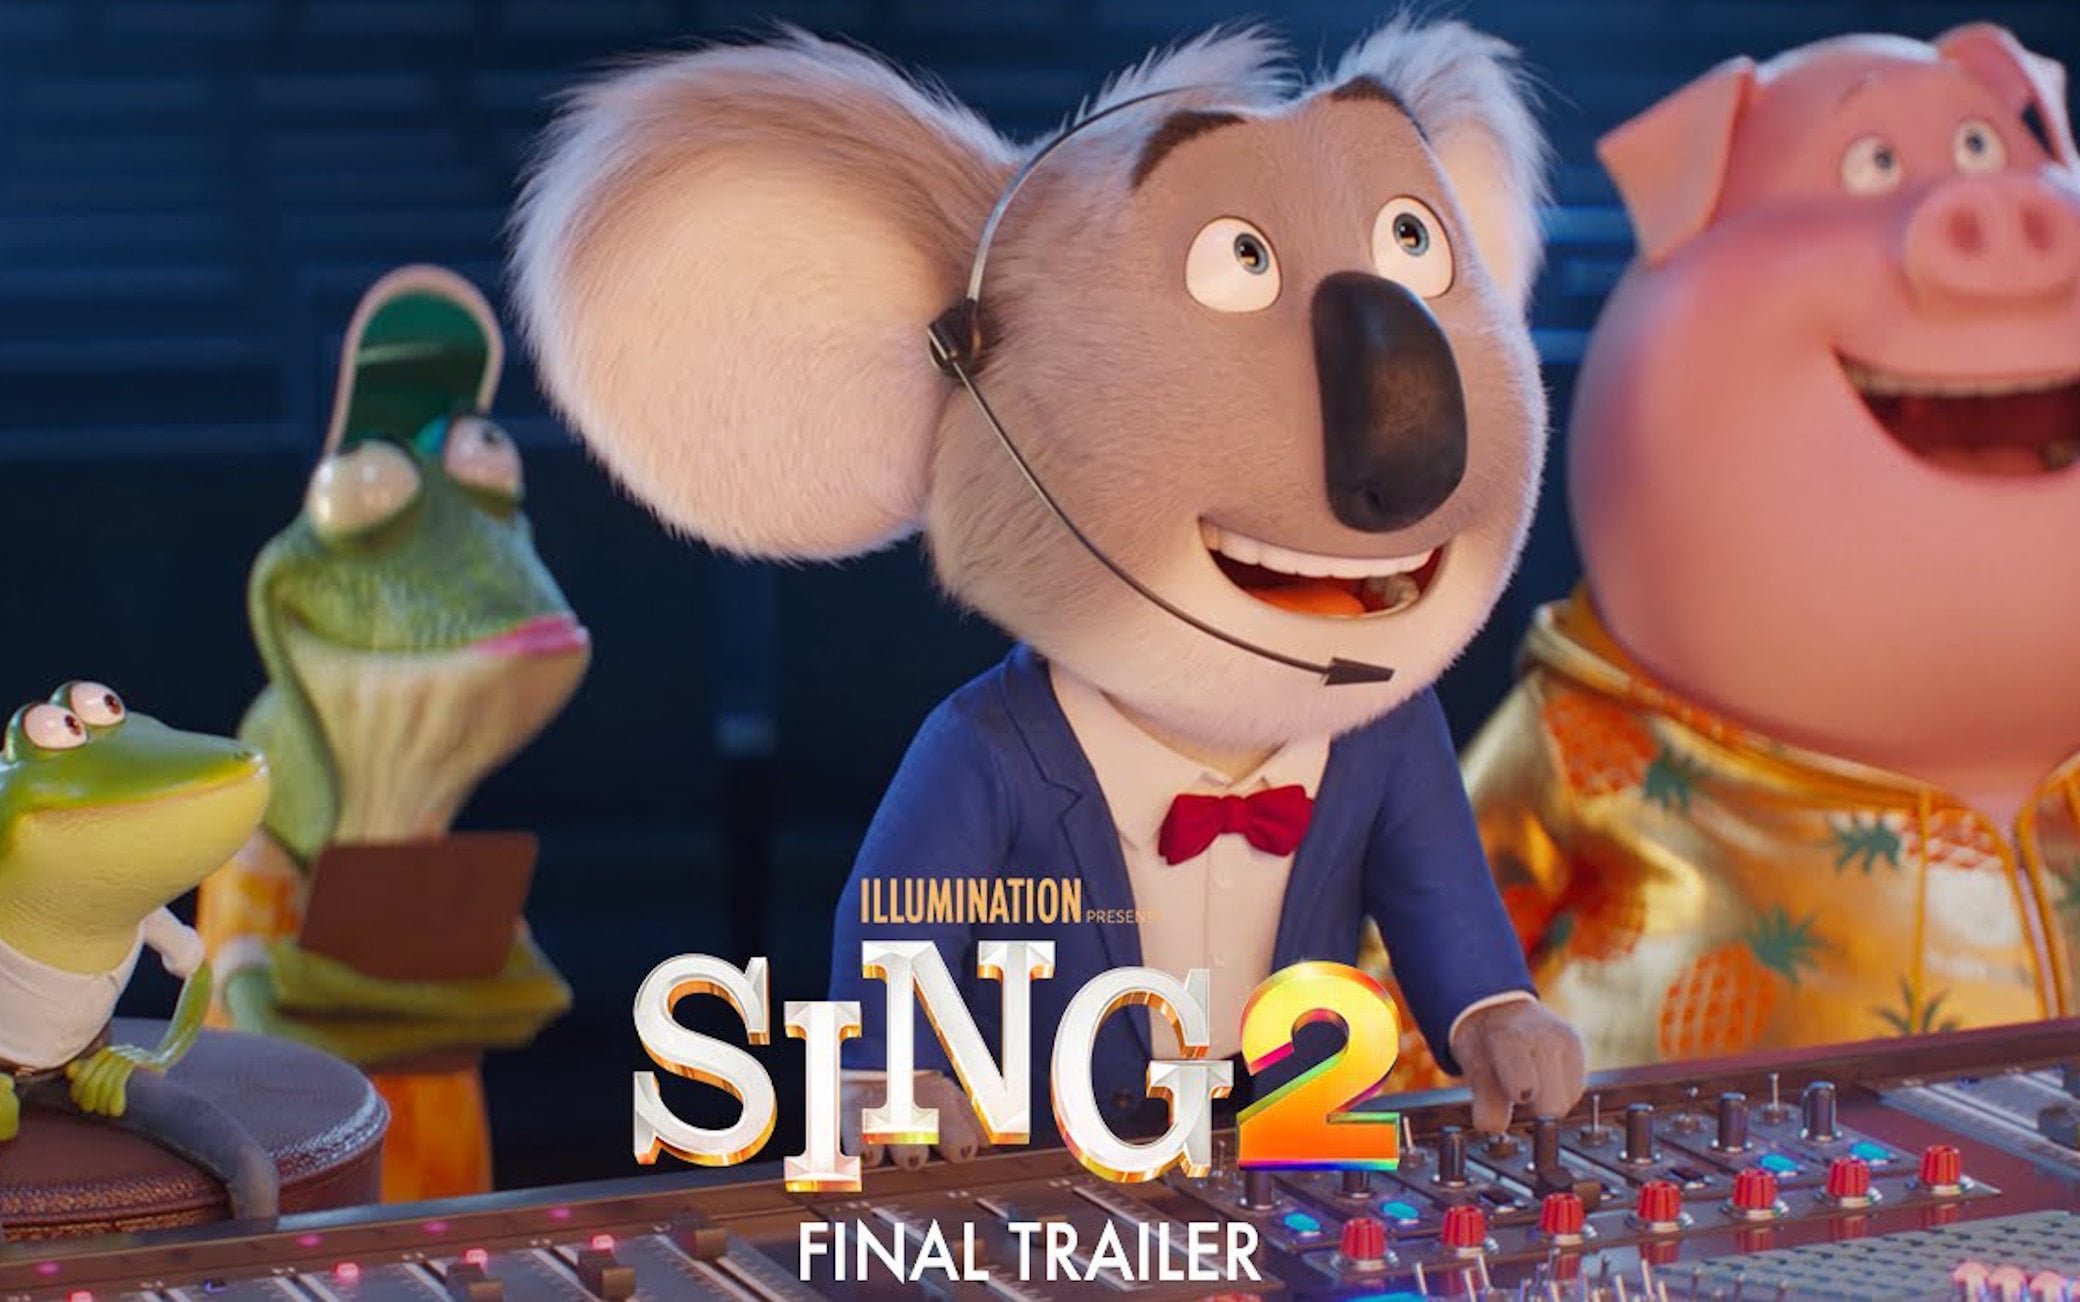 Sing 2, the final trailer of the highly anticipated sequel increases the hype exponentially